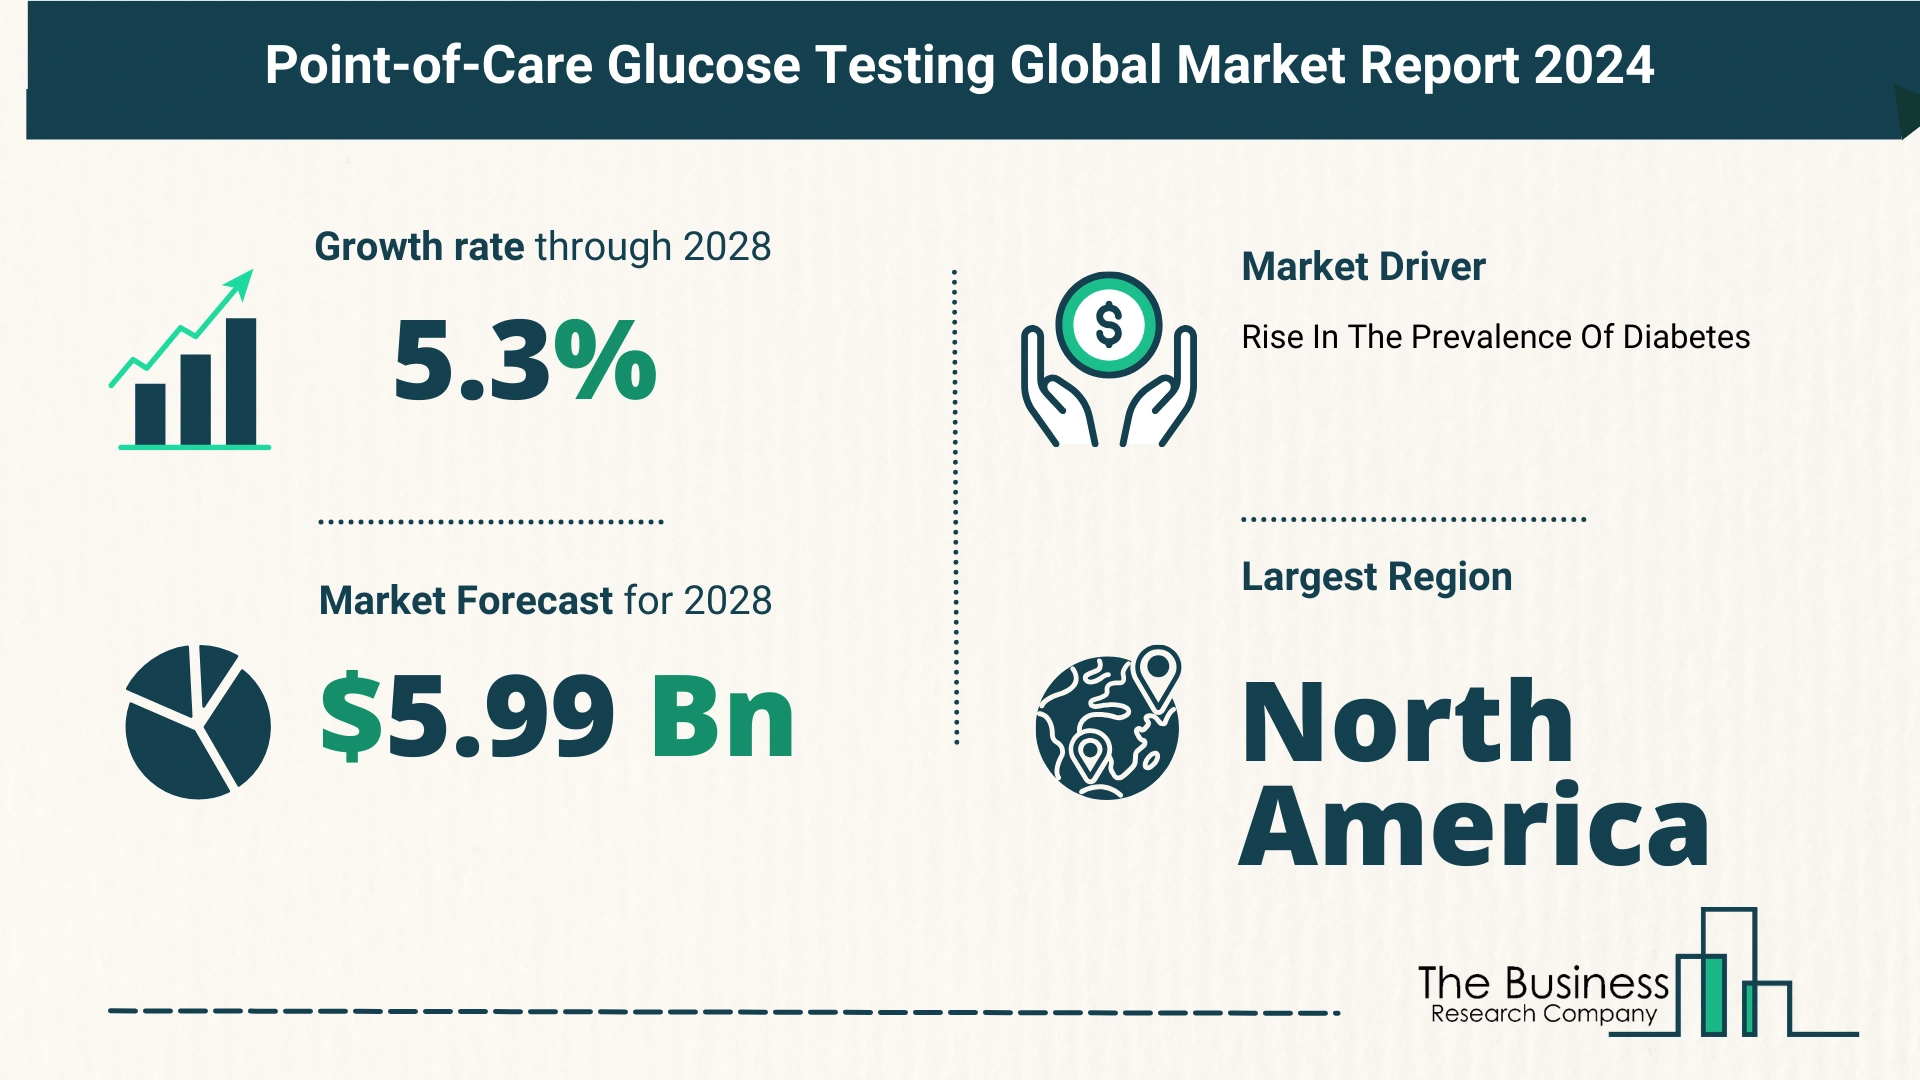 Understand How The Point-of-Care Glucose Testing Market Is Poised To Grow Through 2024-2033